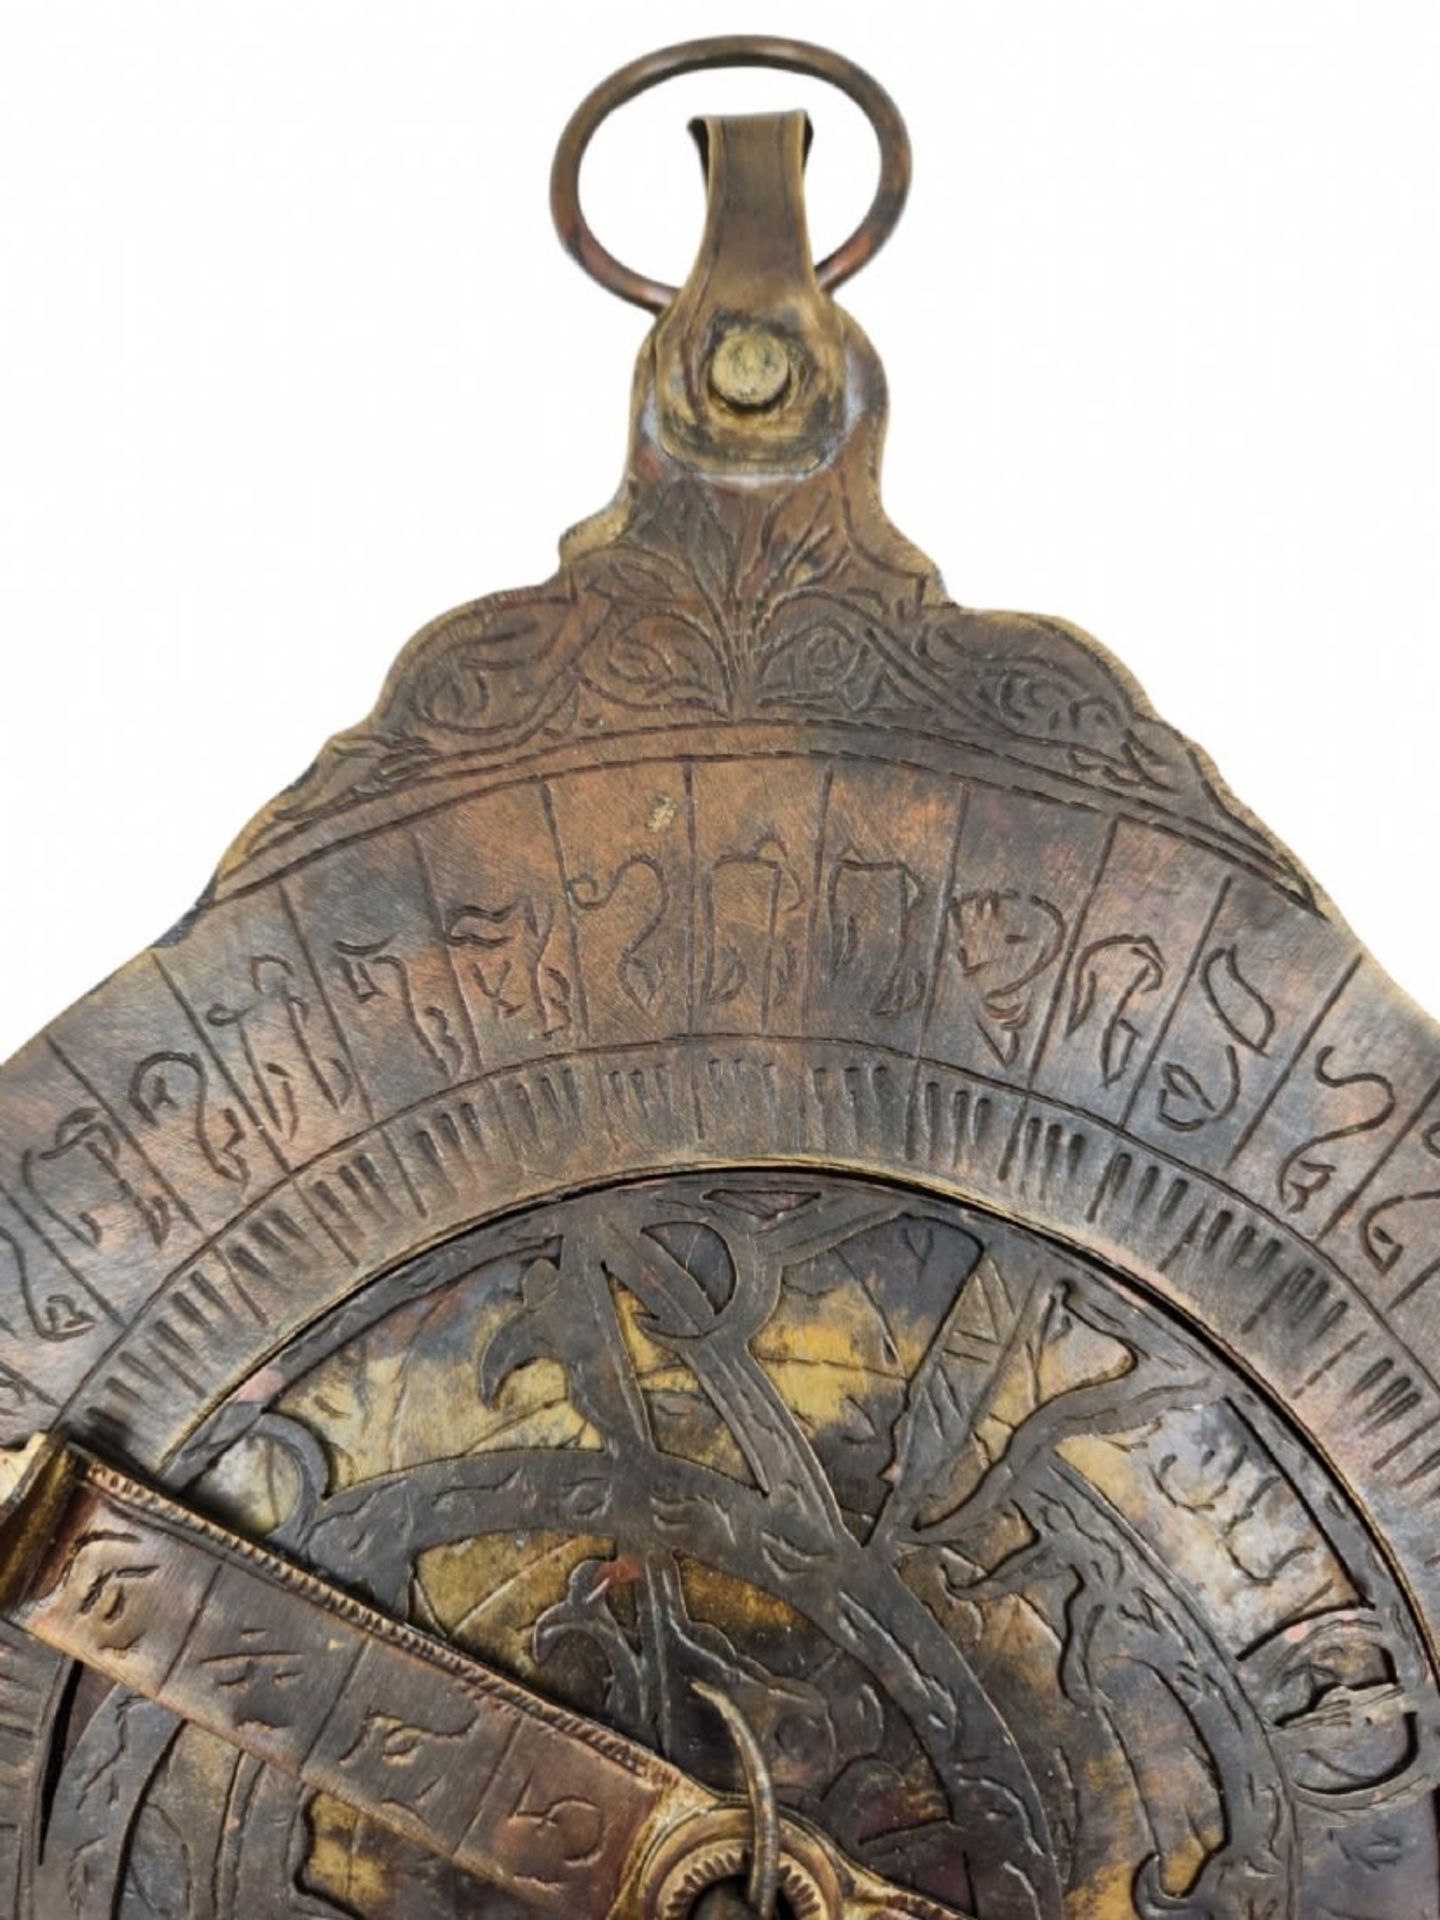 Astrolabe - Islamic Persian, made of brass, decorated with calligraphic engravings, end of the - Image 6 of 6